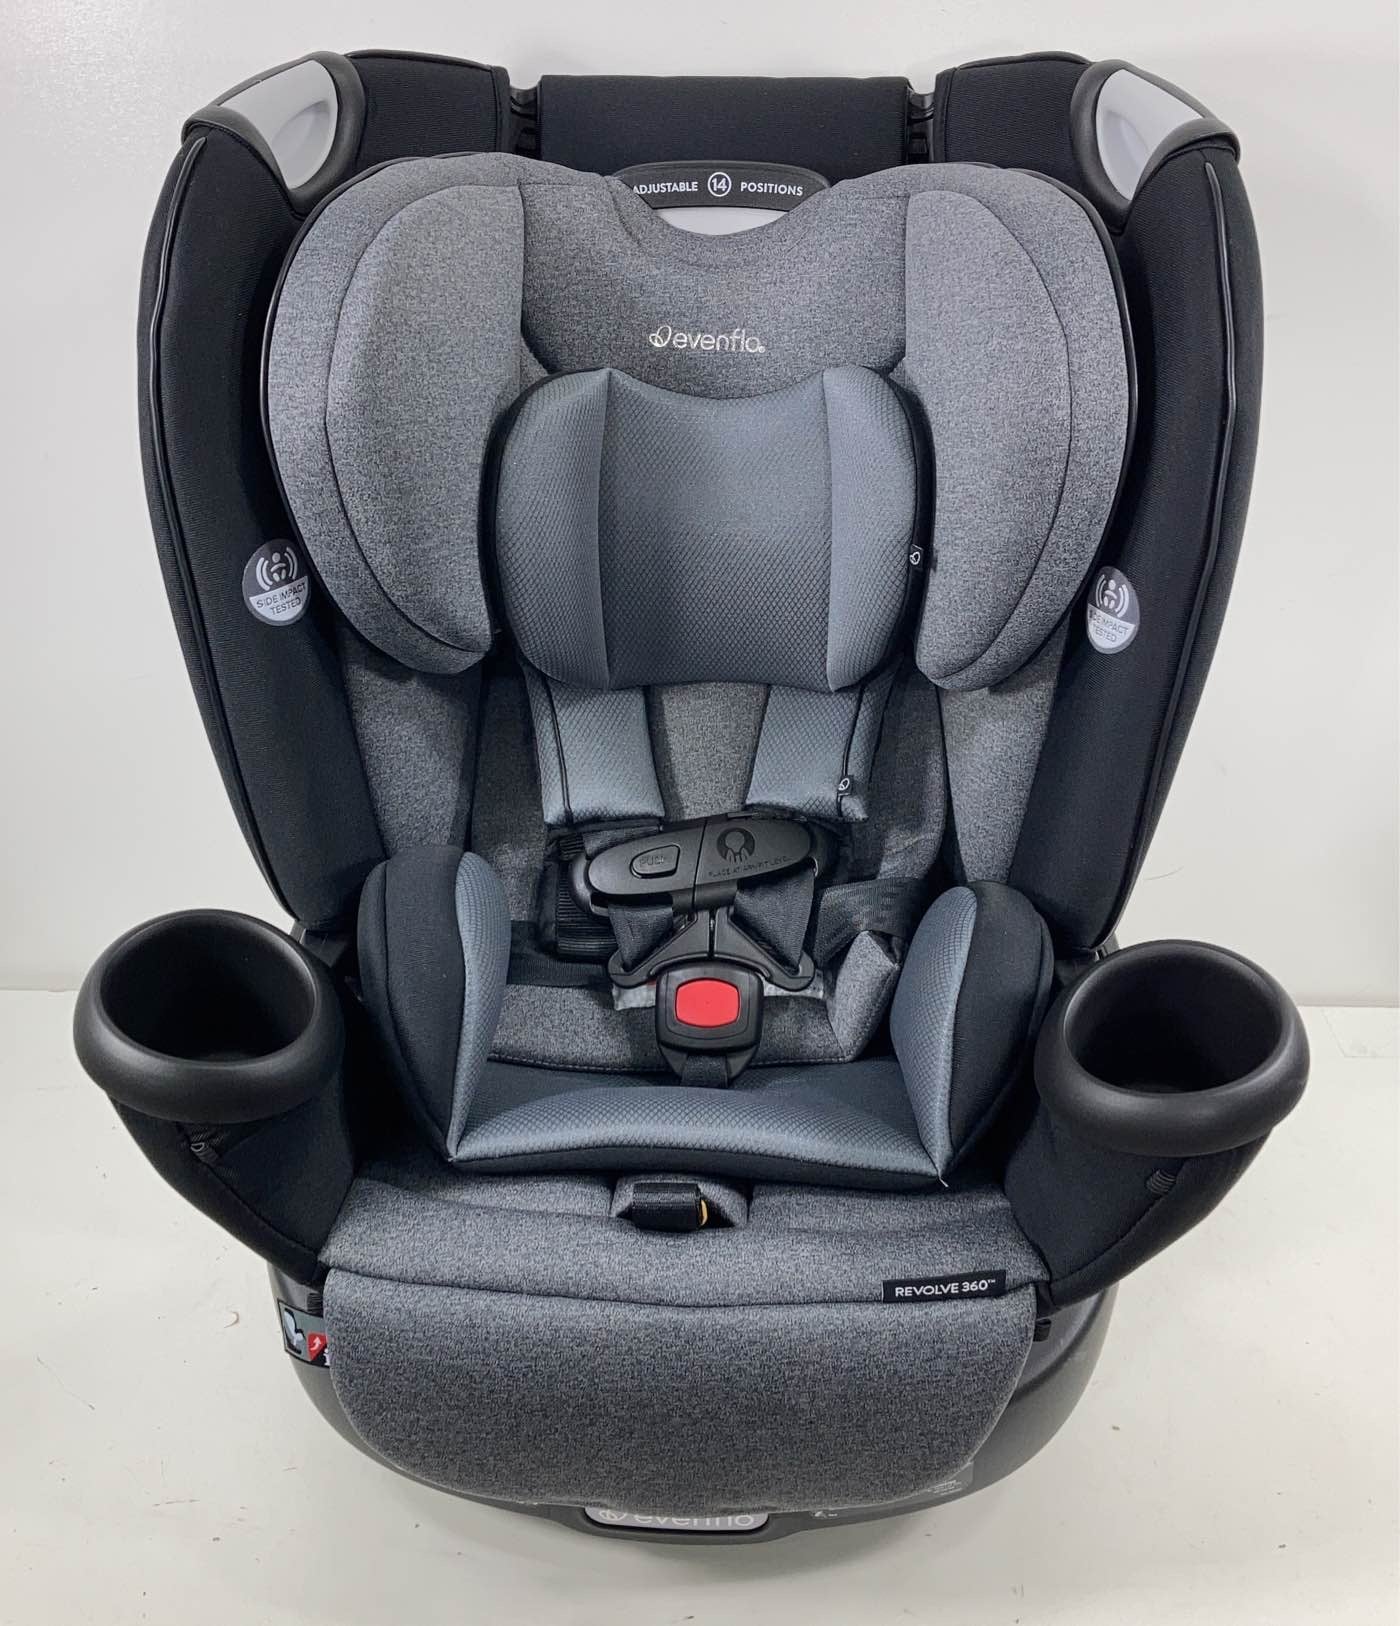  Evenflo Gold Revolve360 Rotational All-in-1 Convertible Car  Seat Swivel Car Seat Rotating Car Seat for All Ages Swivel Baby Car Seat  Mode Changing 4120Lb Car Seat and Booster Car Seat